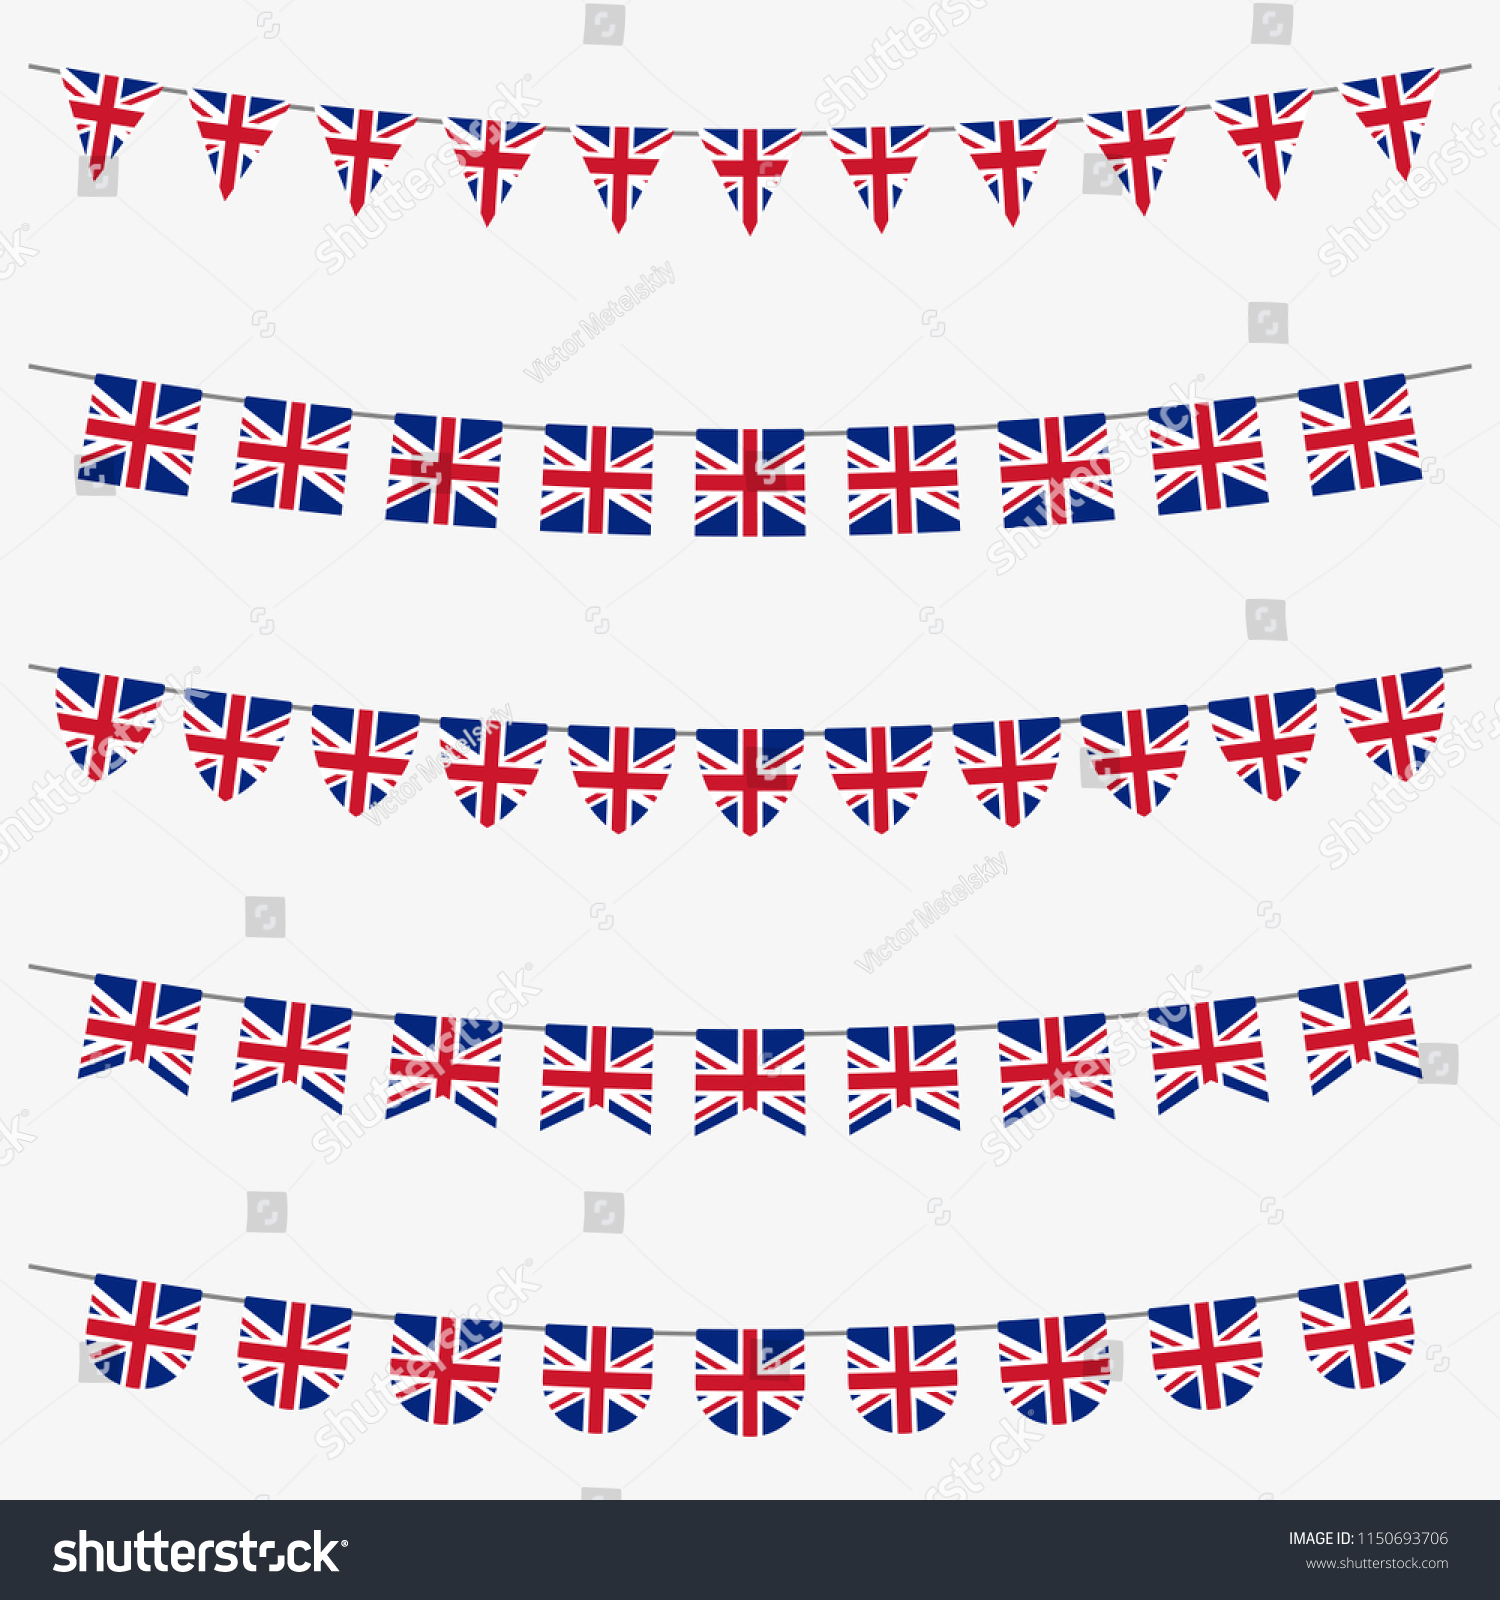 SVG of British bunting set with UK flags. Great Britain flags garland. Union Jack decoration for celebrate, party or festival. Vector illustration.  svg